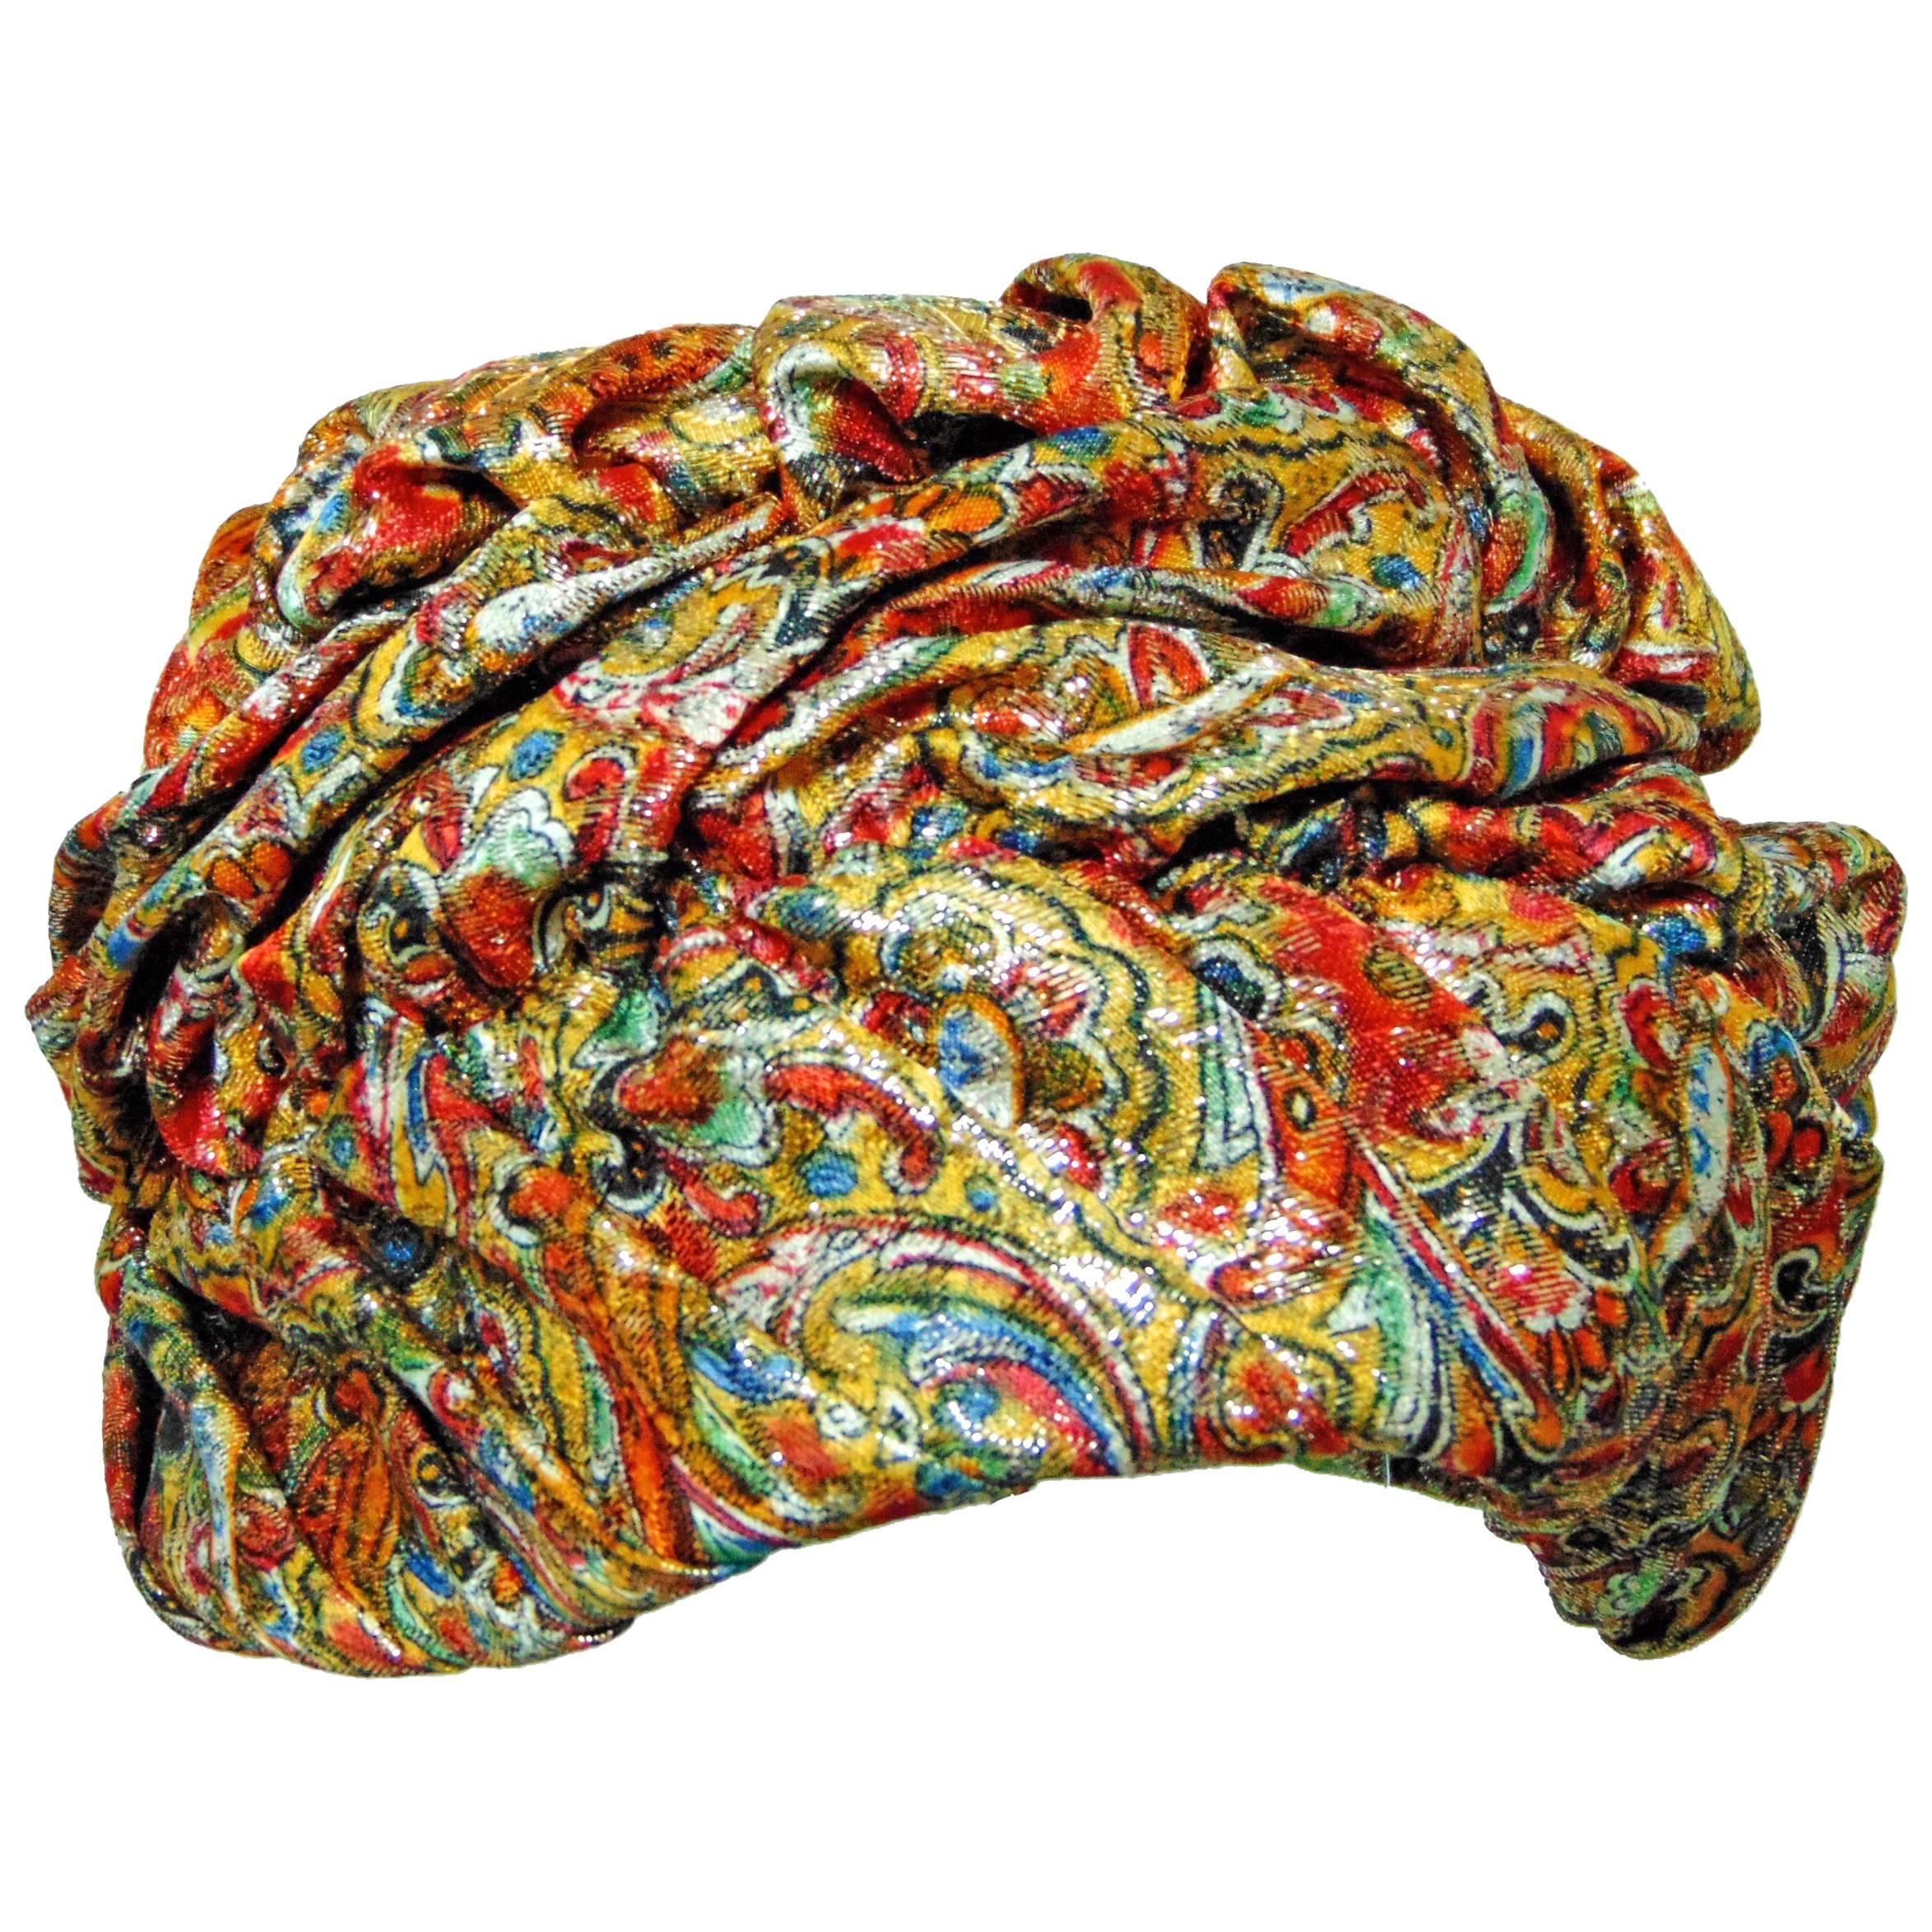 1950s Colorful Metallic Paisley Turban Hat by Marshall Field & Company Size S 